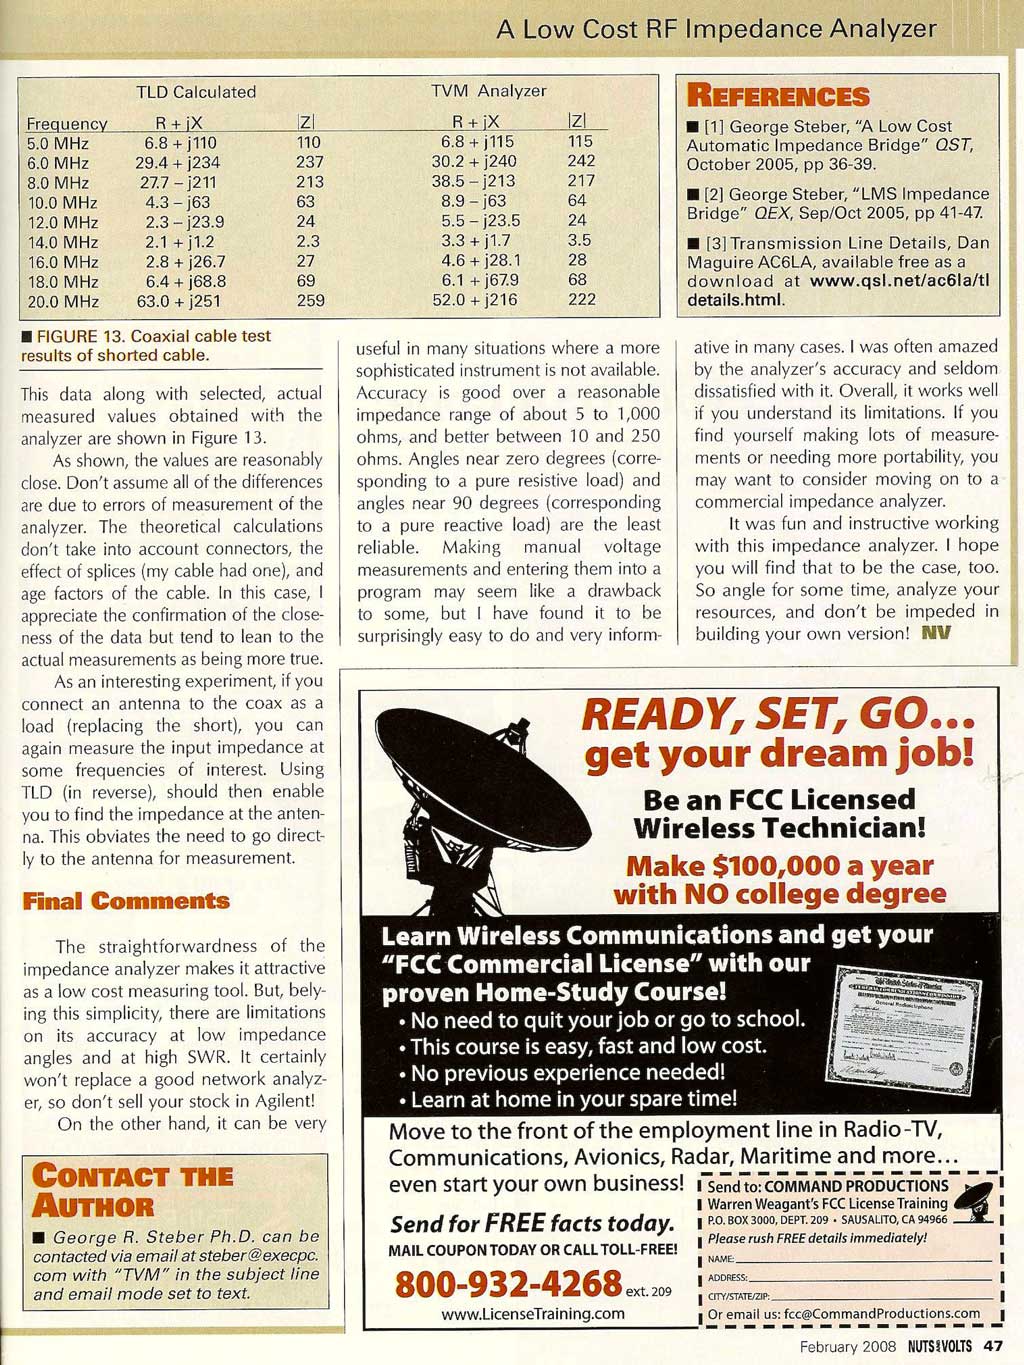 scanned page 47 from Nuts & Volts, Feb 2008